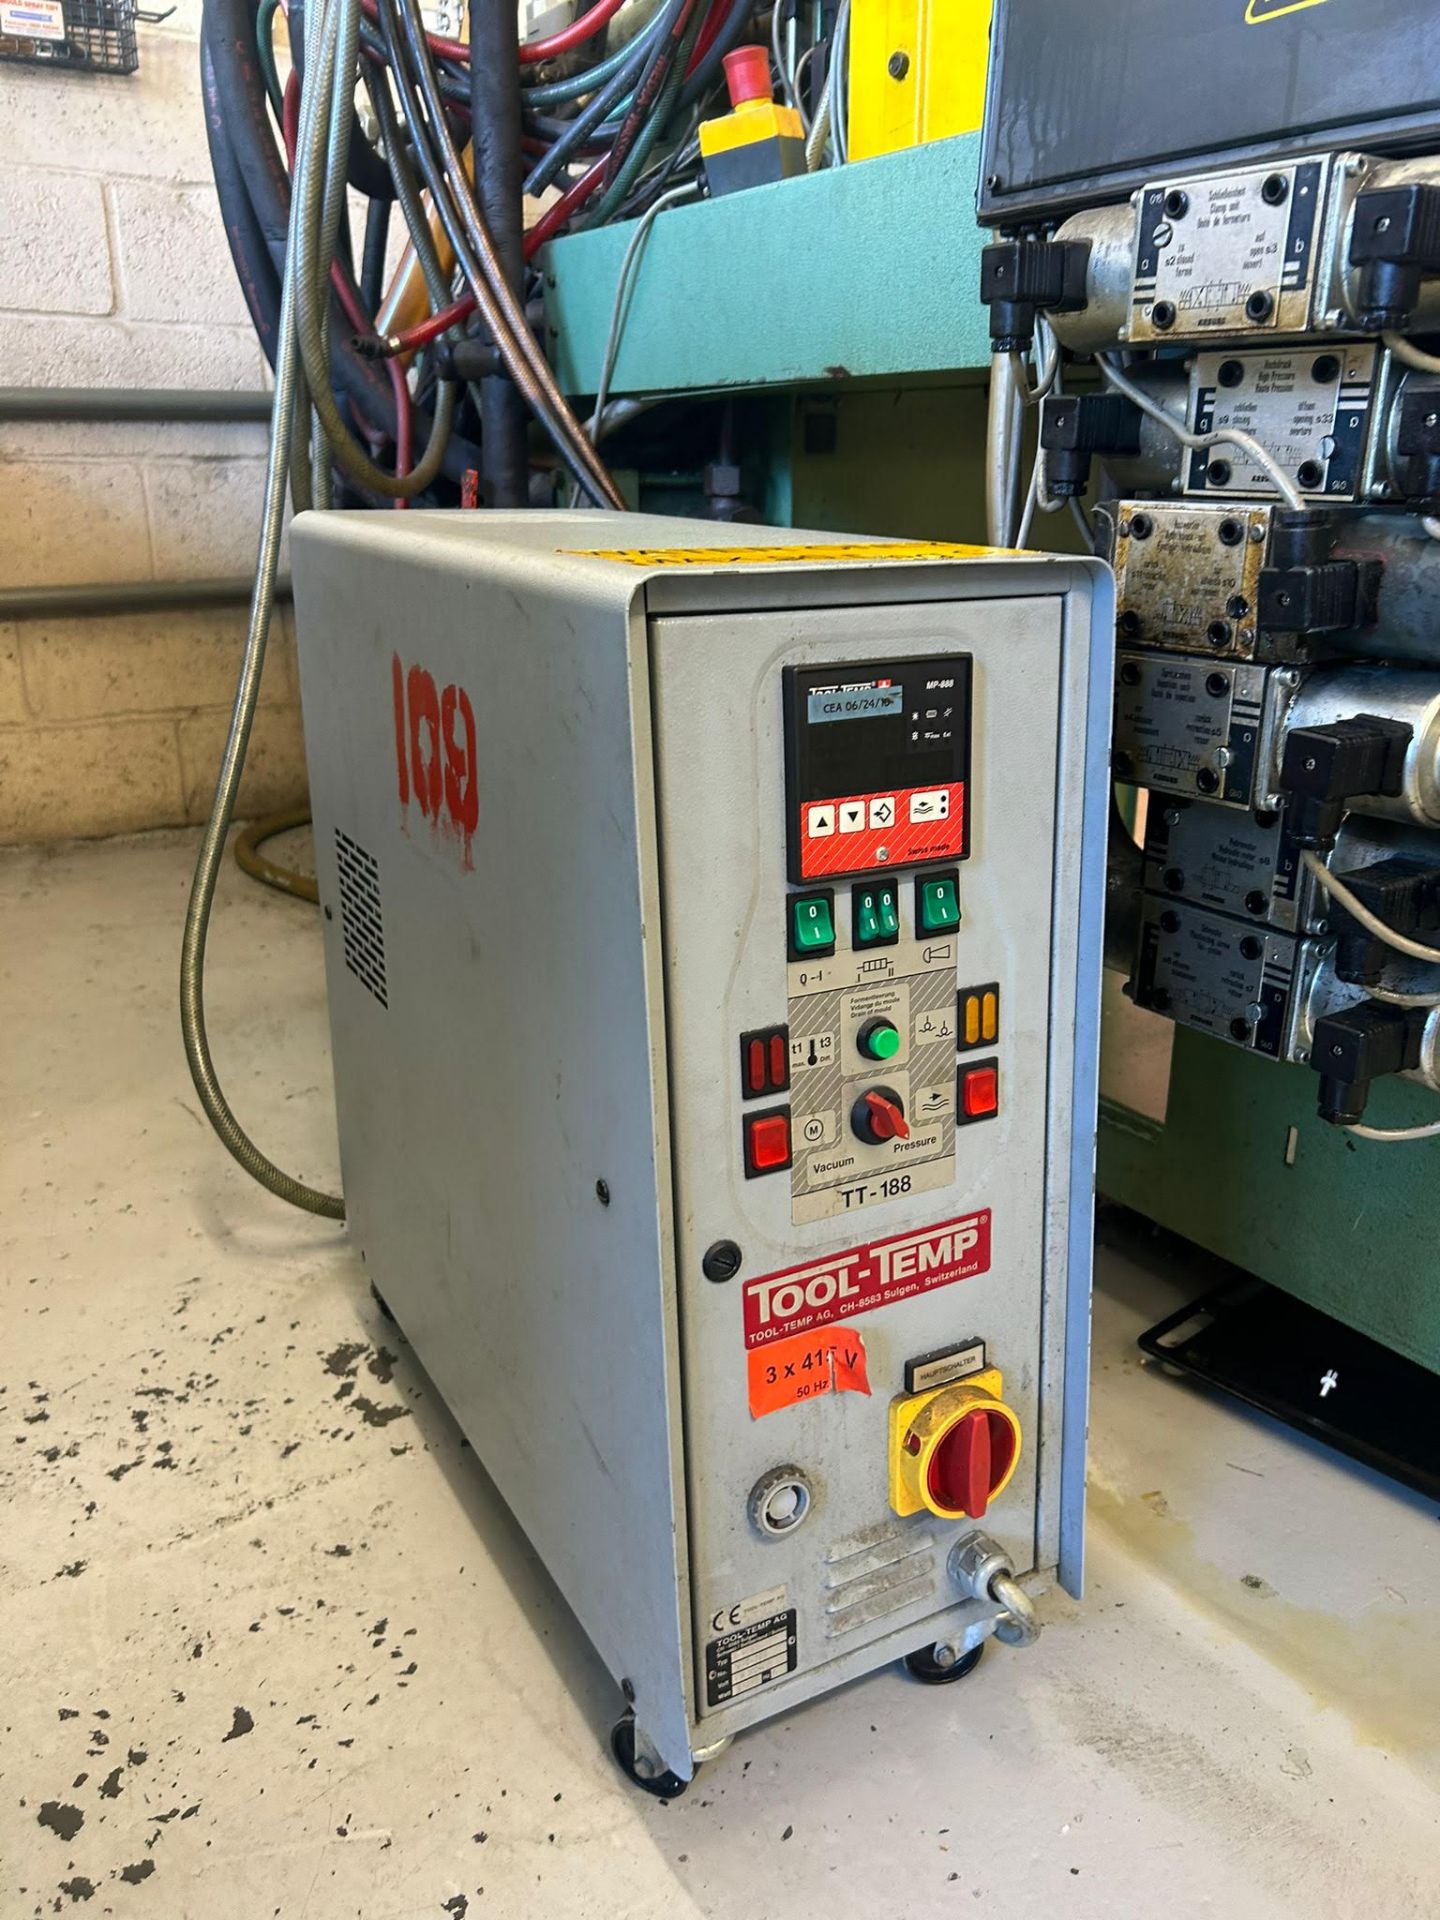 Arburg 220-90-400 injection moulding machine and Tool-temp temperature control unit - Image 11 of 11